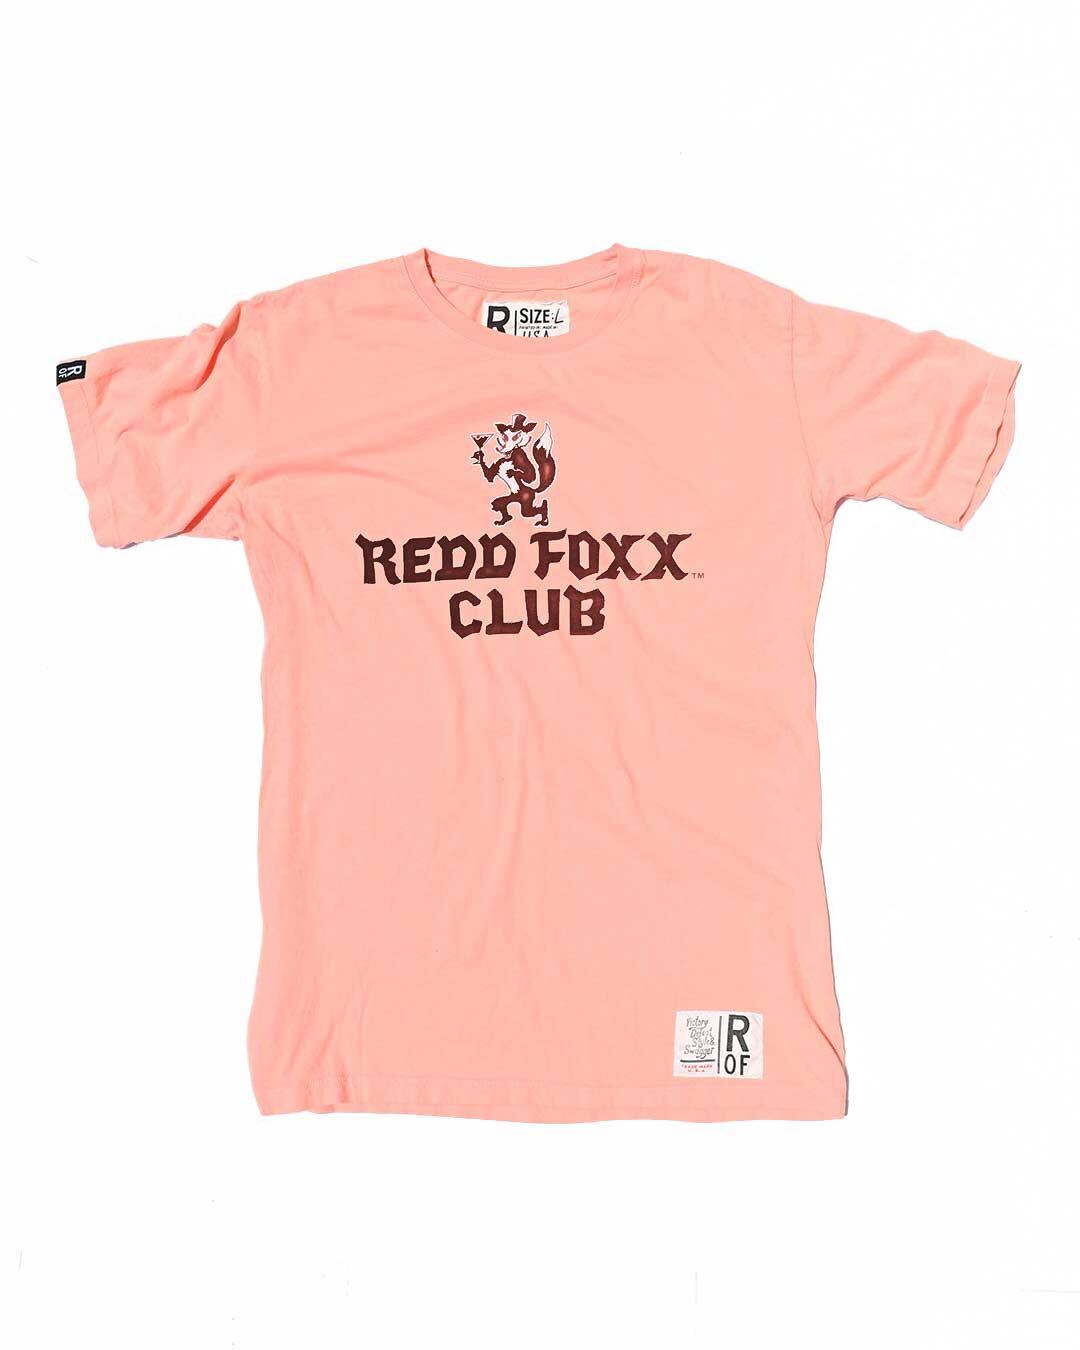 Redd Foxx Classic Coral Tee - Roots of Fight Canada